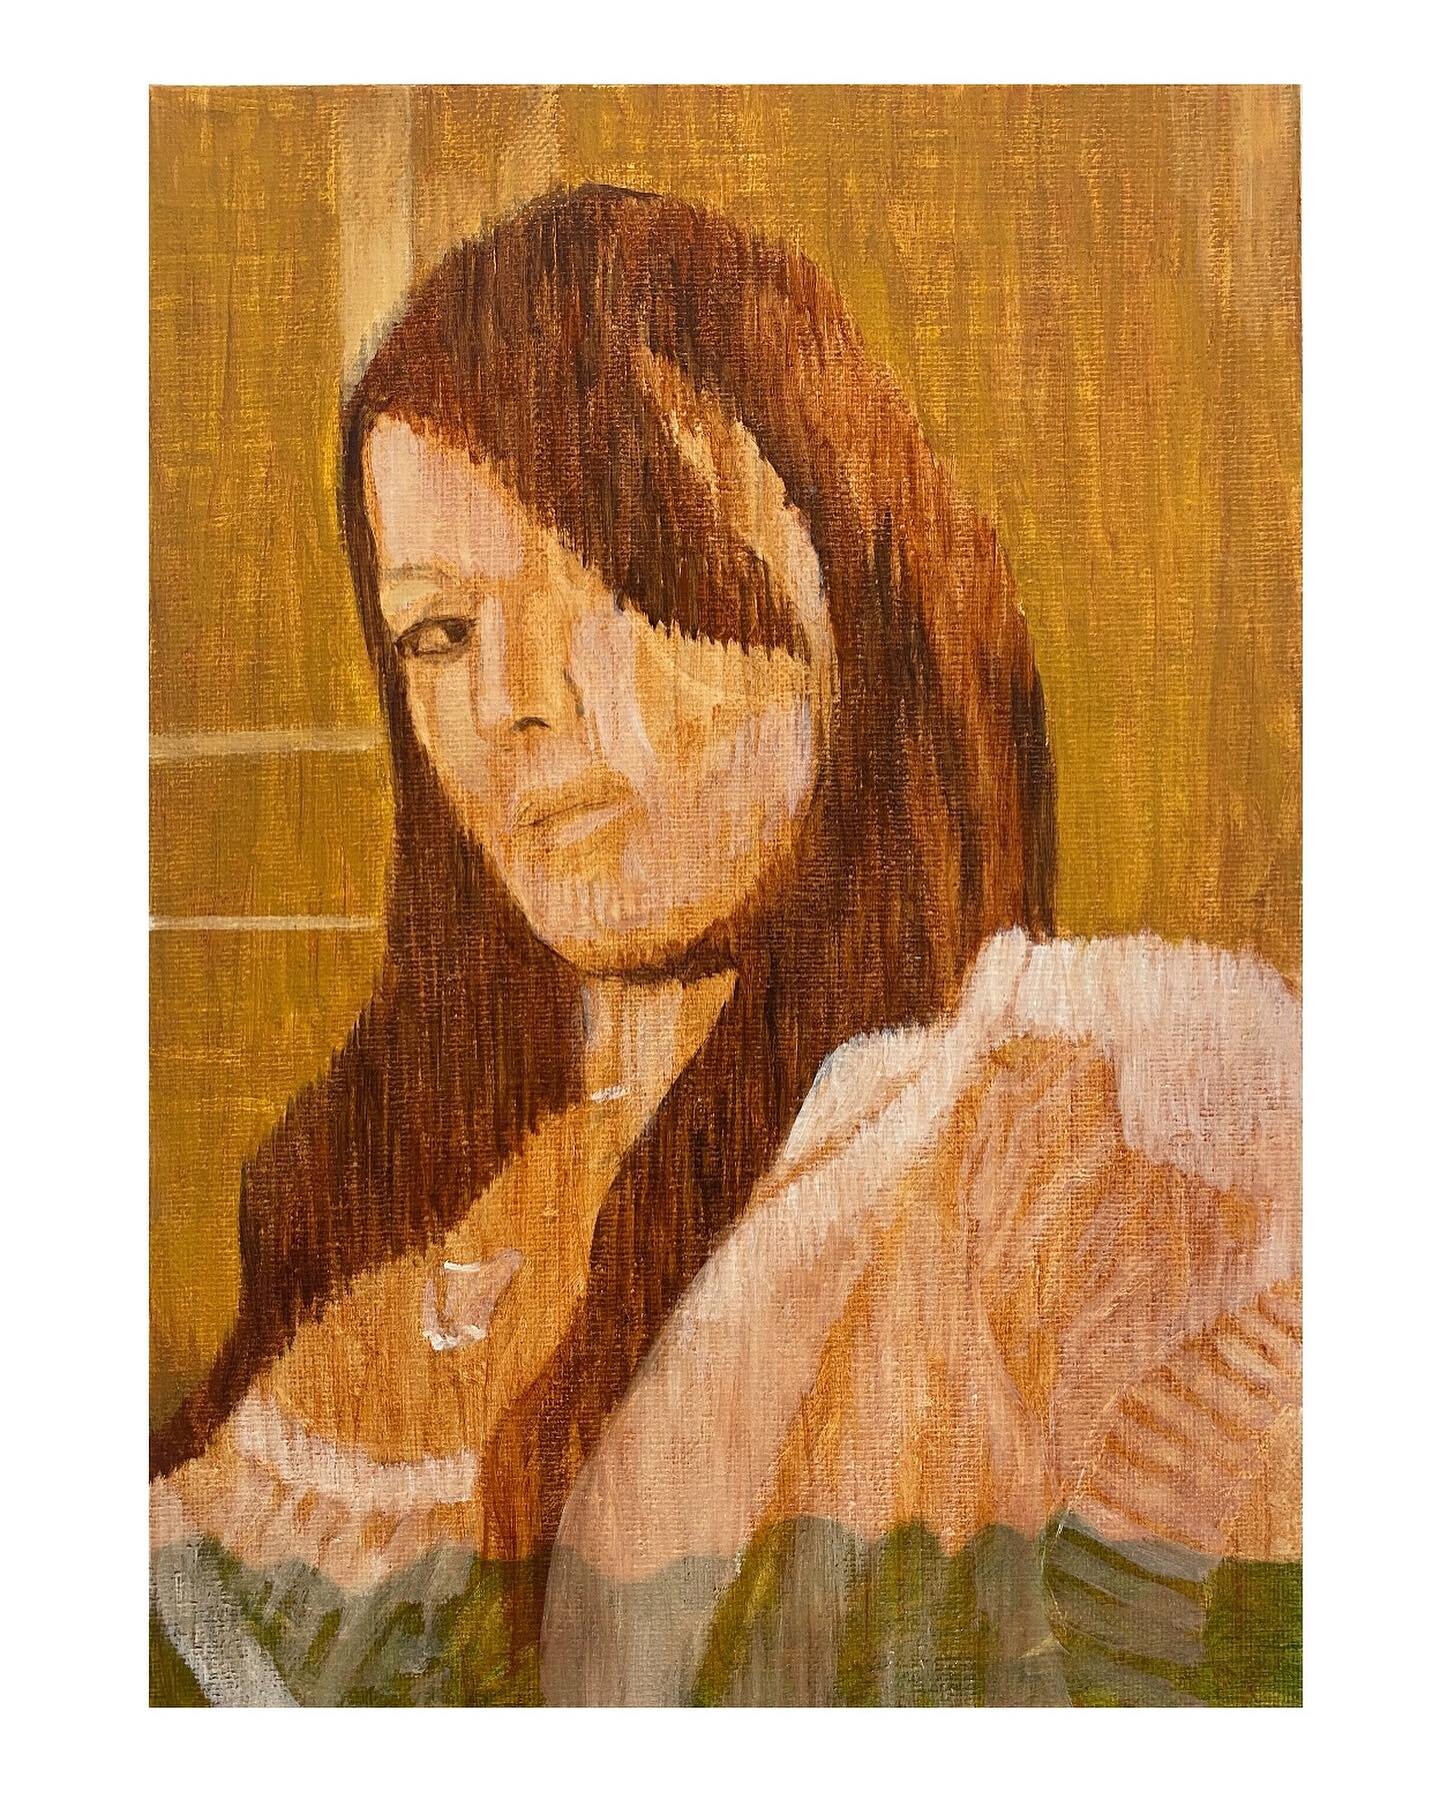 Portraits from #FatherMotherDaughter
@dhampson52 Exhibition of paintings and prints at @generalpractice
4-18 November, 2023

Artist talk 4pm, Private View 5pm
4 November, 2023

25 Clasketgate, Lincoln, LN2 1JJ

#contemporaryart 
#contemporaryfigurati